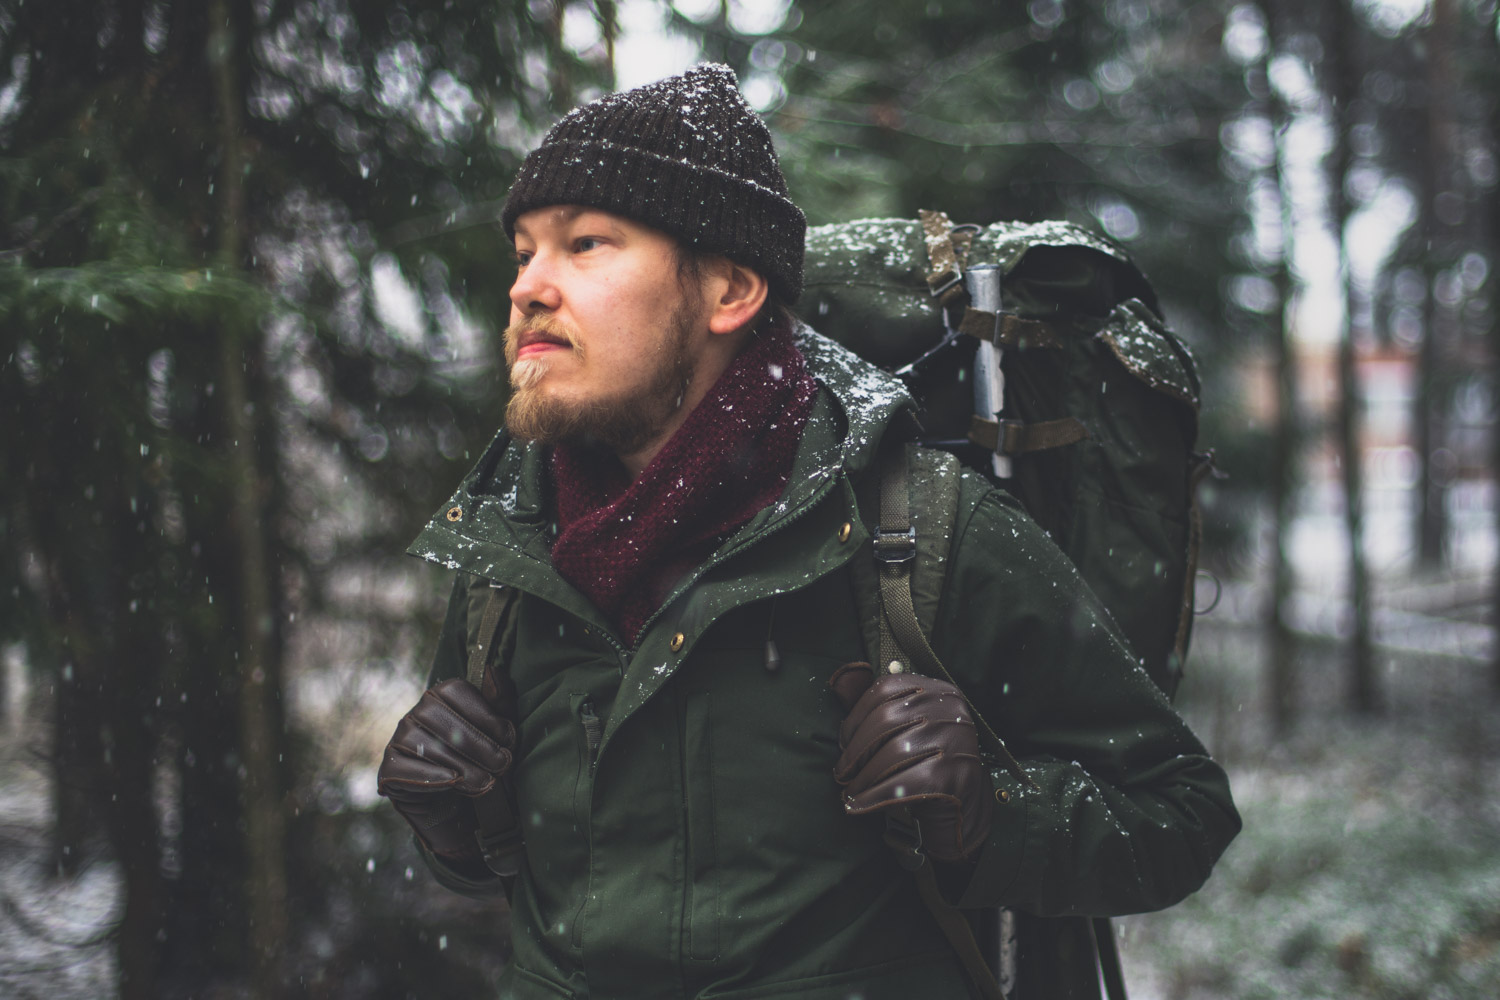 A man in the woods with some snow and in hiking gear.